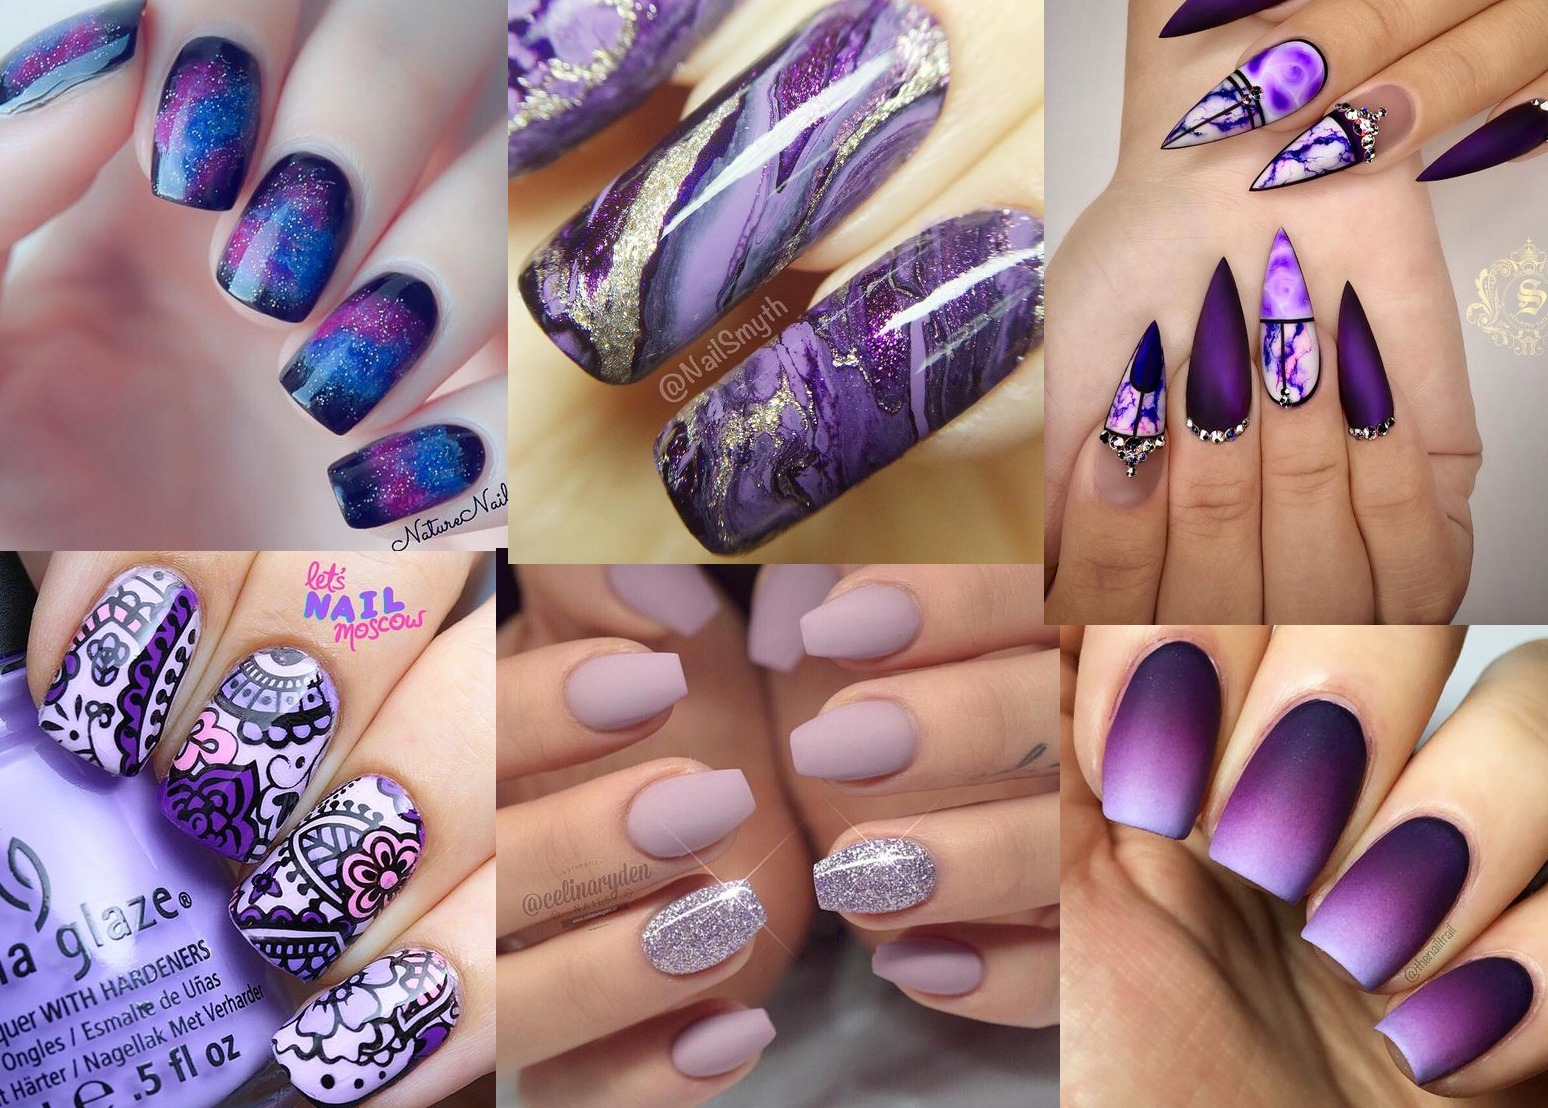 2. Lavender and Lace Bridal Nail Art - wide 7